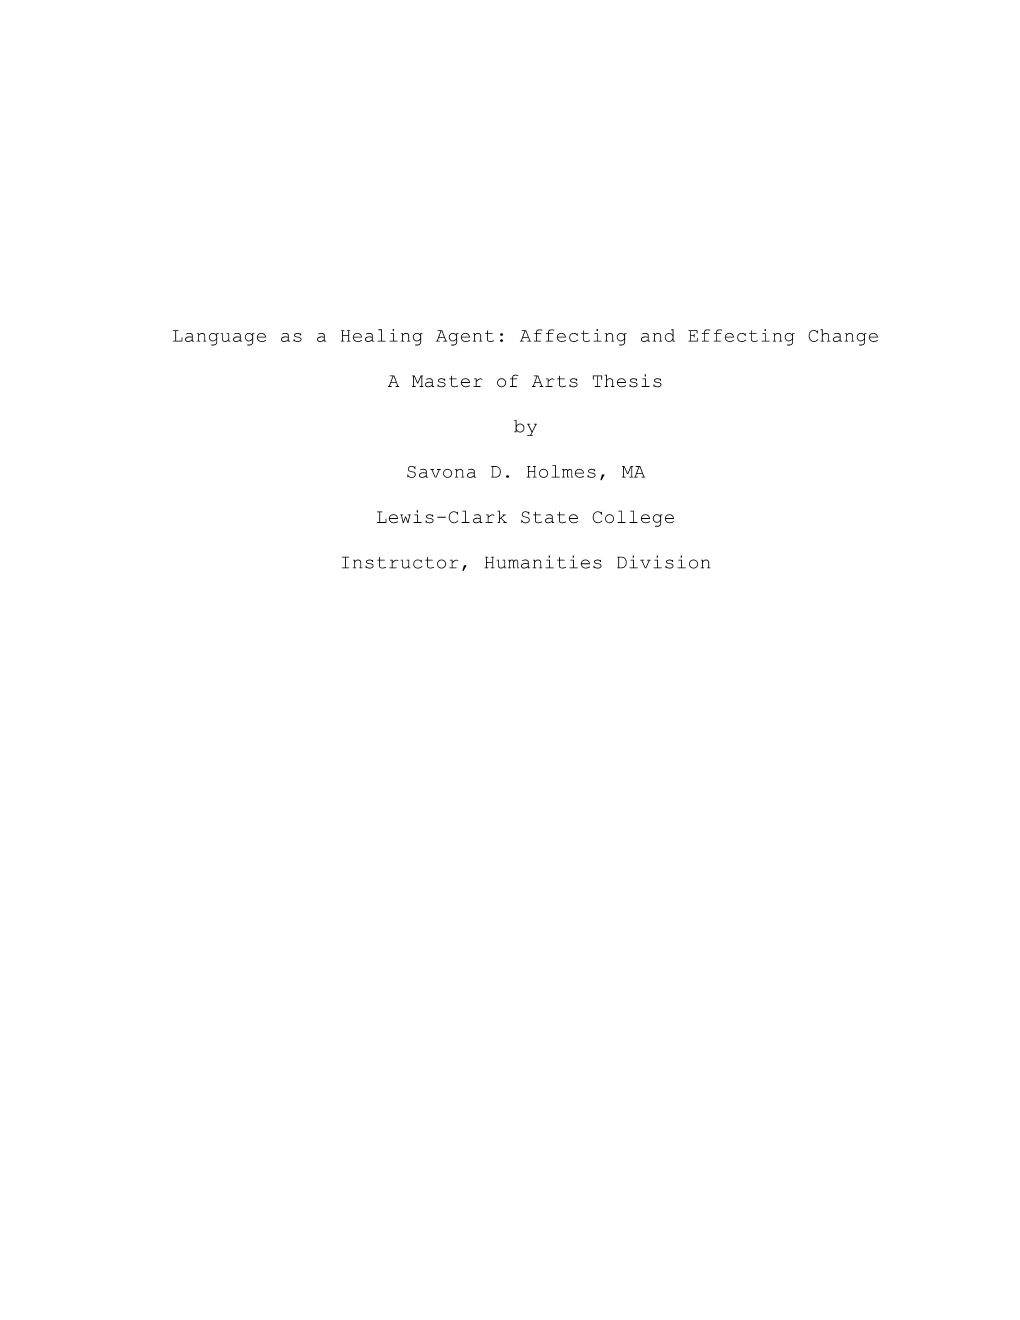 Language As a Healing Agent: Affecting and Effecting Change a Master of Arts Thesis by Savona D. Holmes, MA Lewis-Clark State C